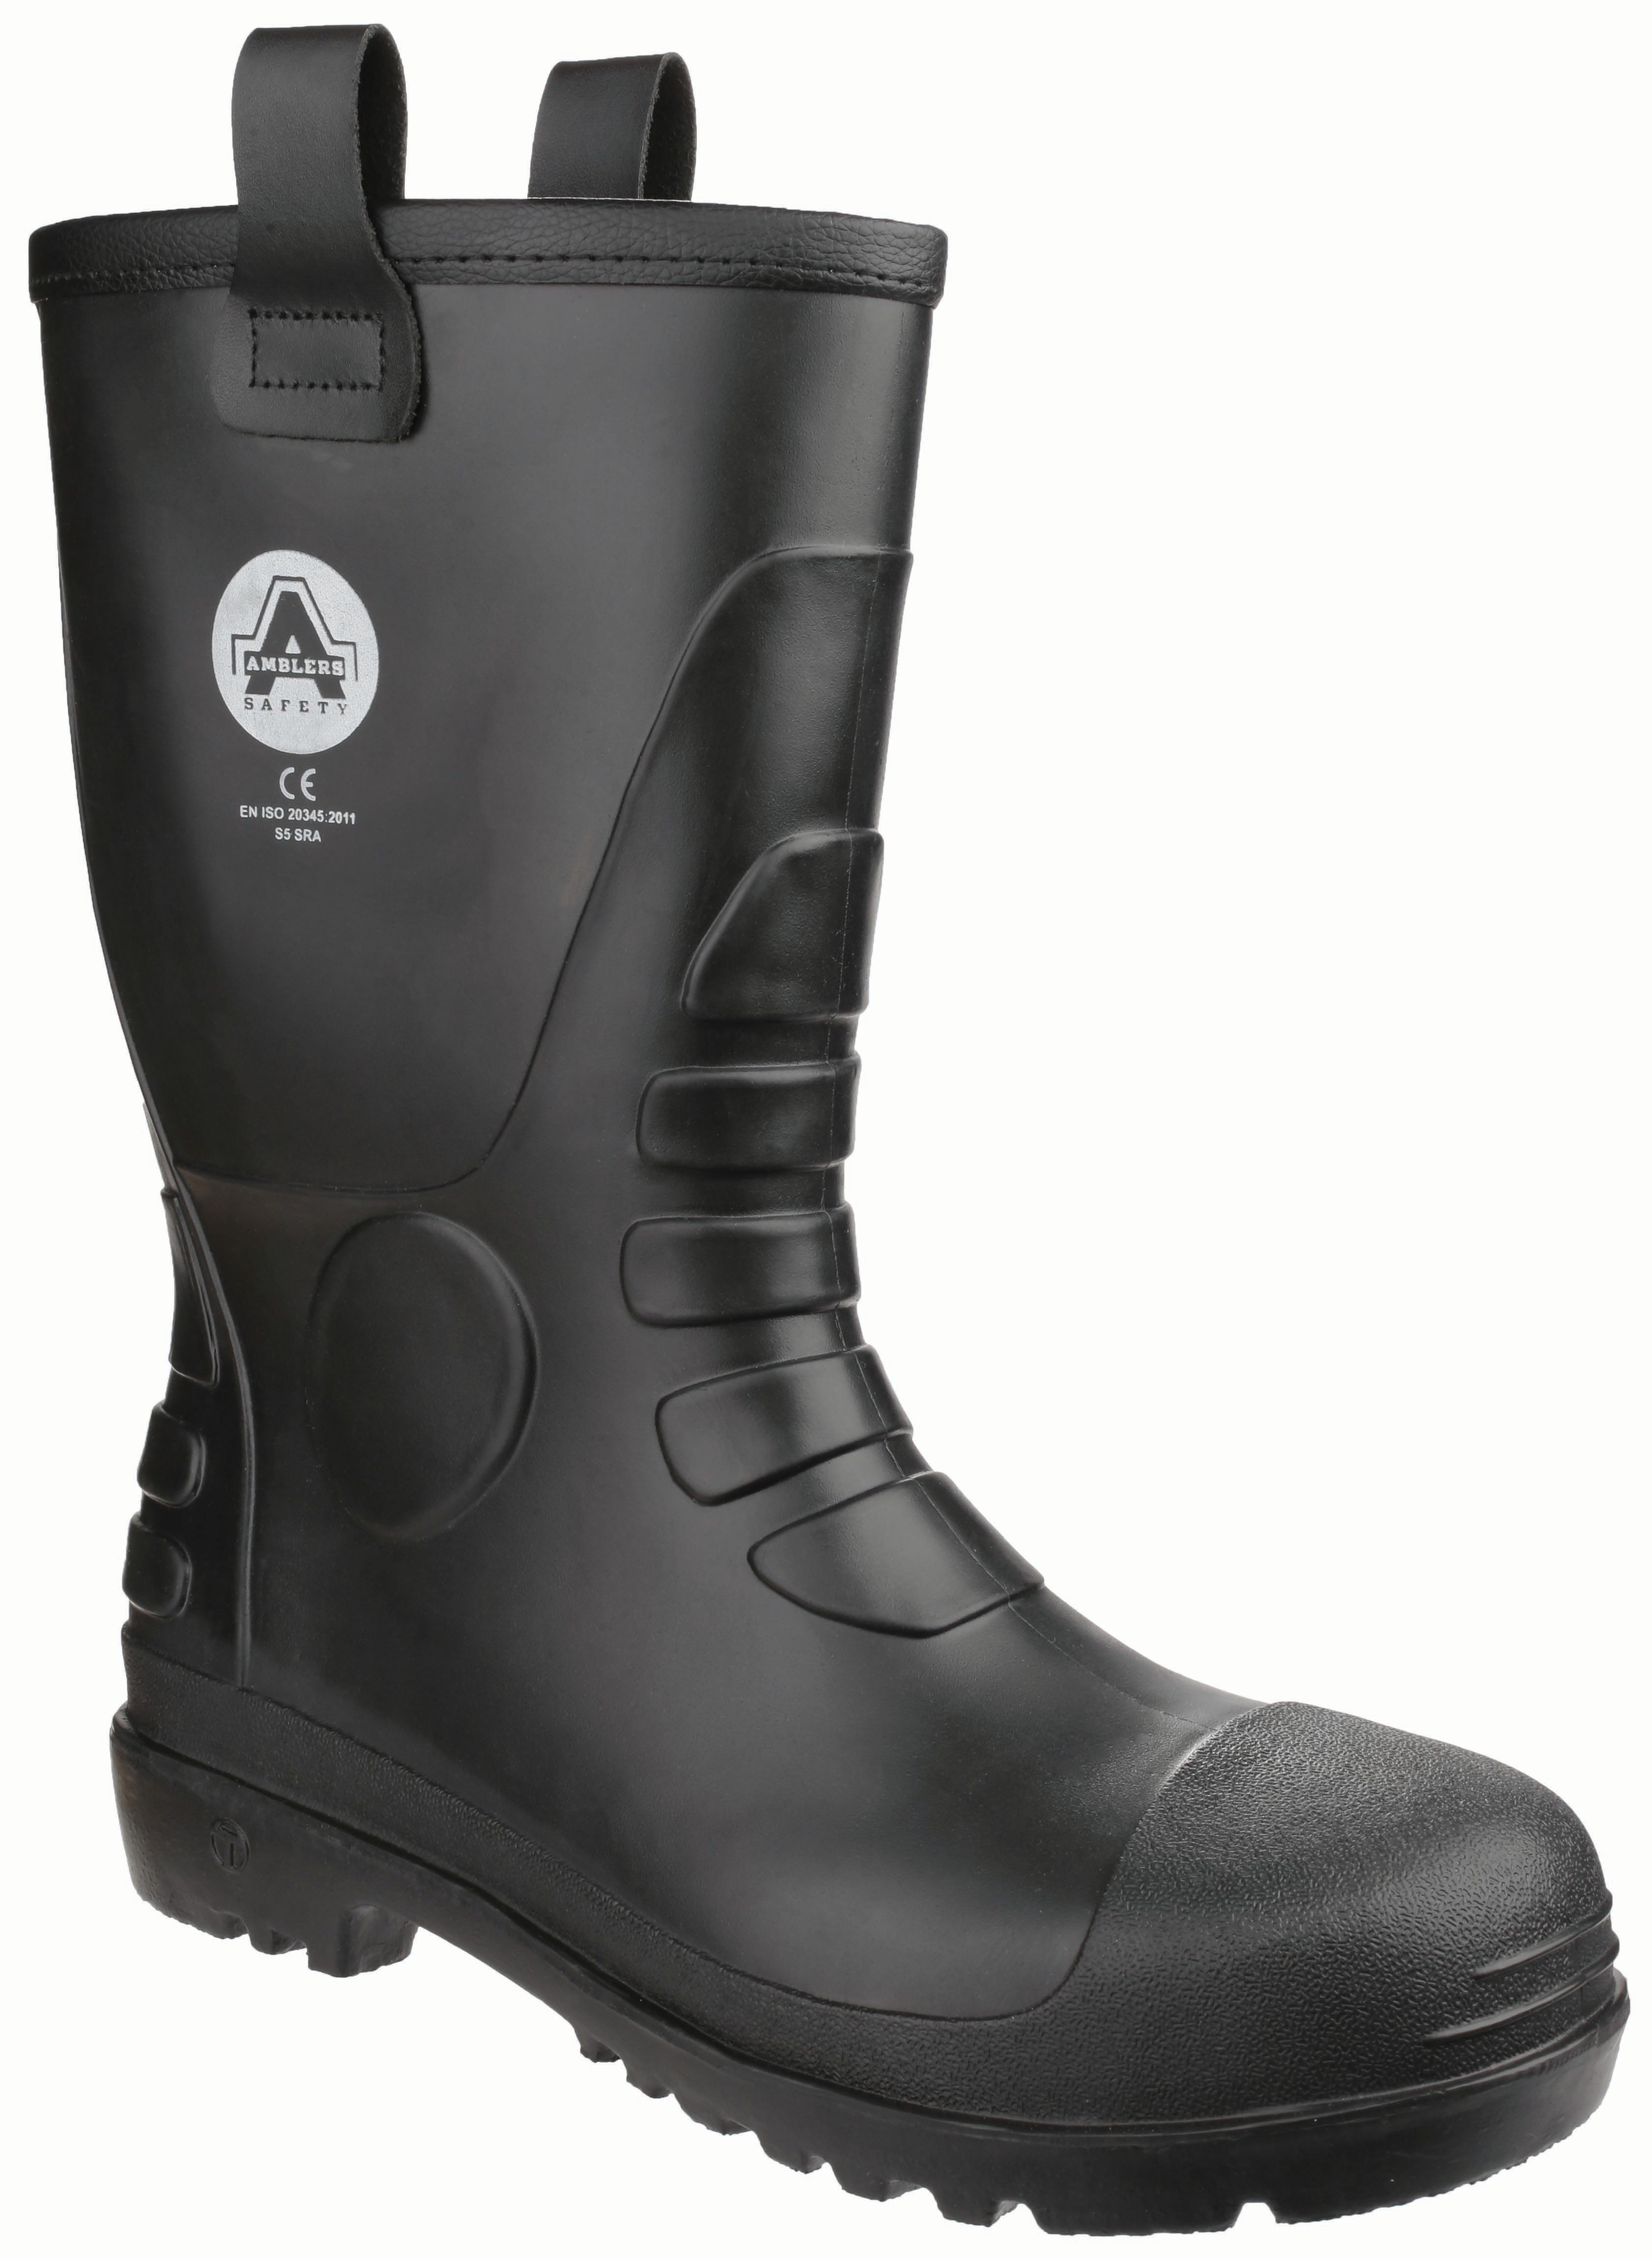 Image of Amblers Safety FS90 Rigger Safety Boot - Black Size 10